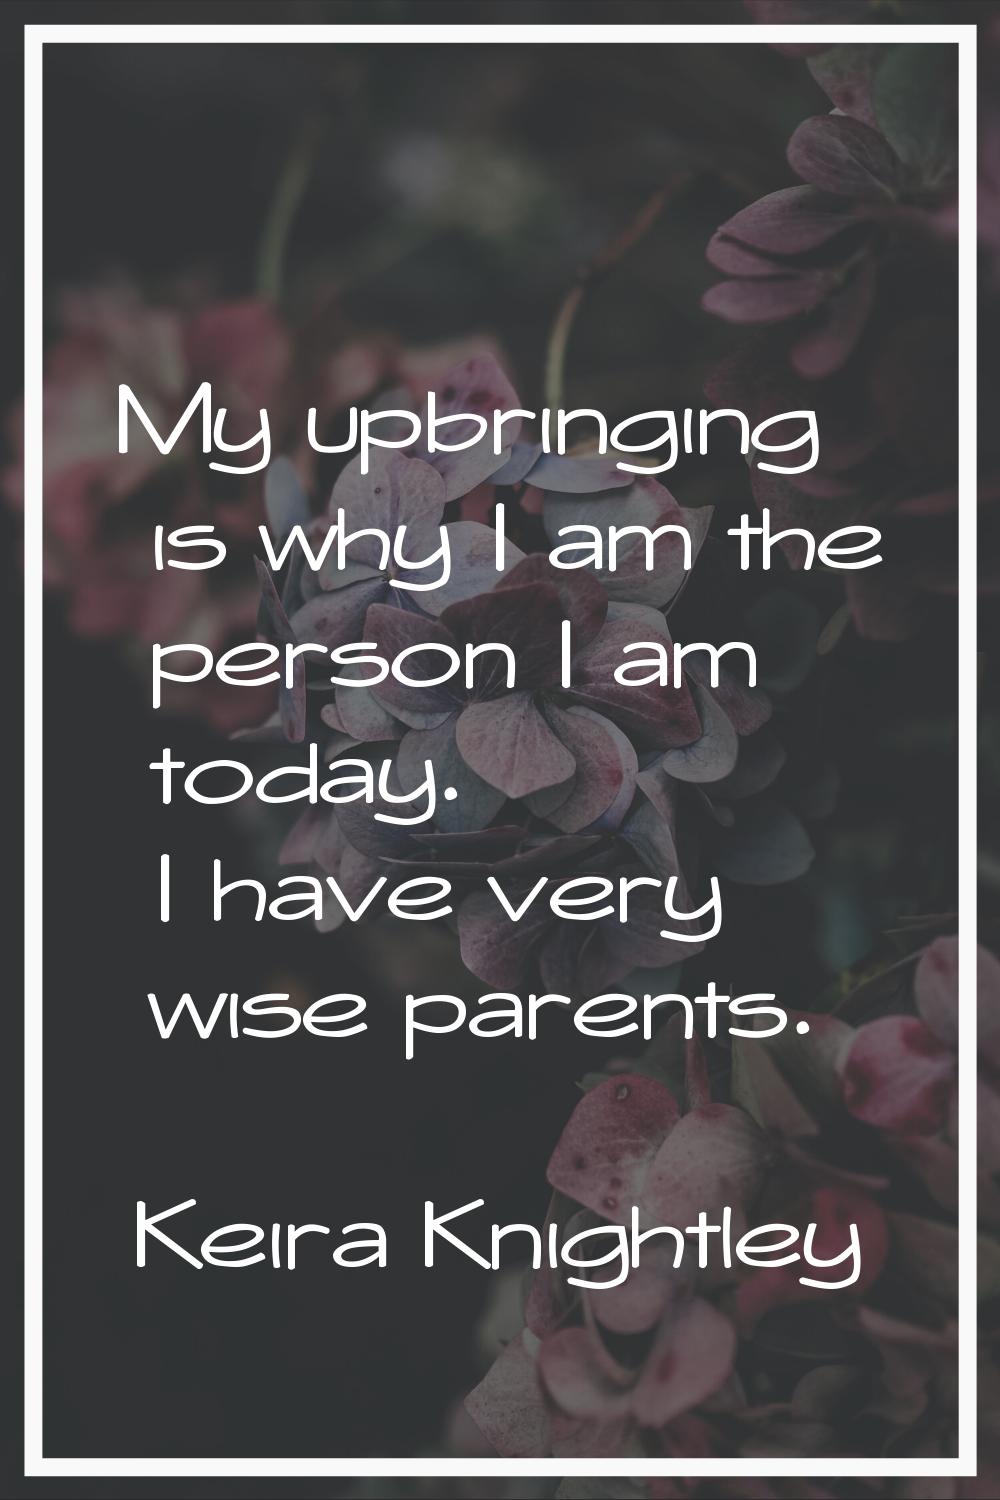 My upbringing is why I am the person I am today. I have very wise parents.